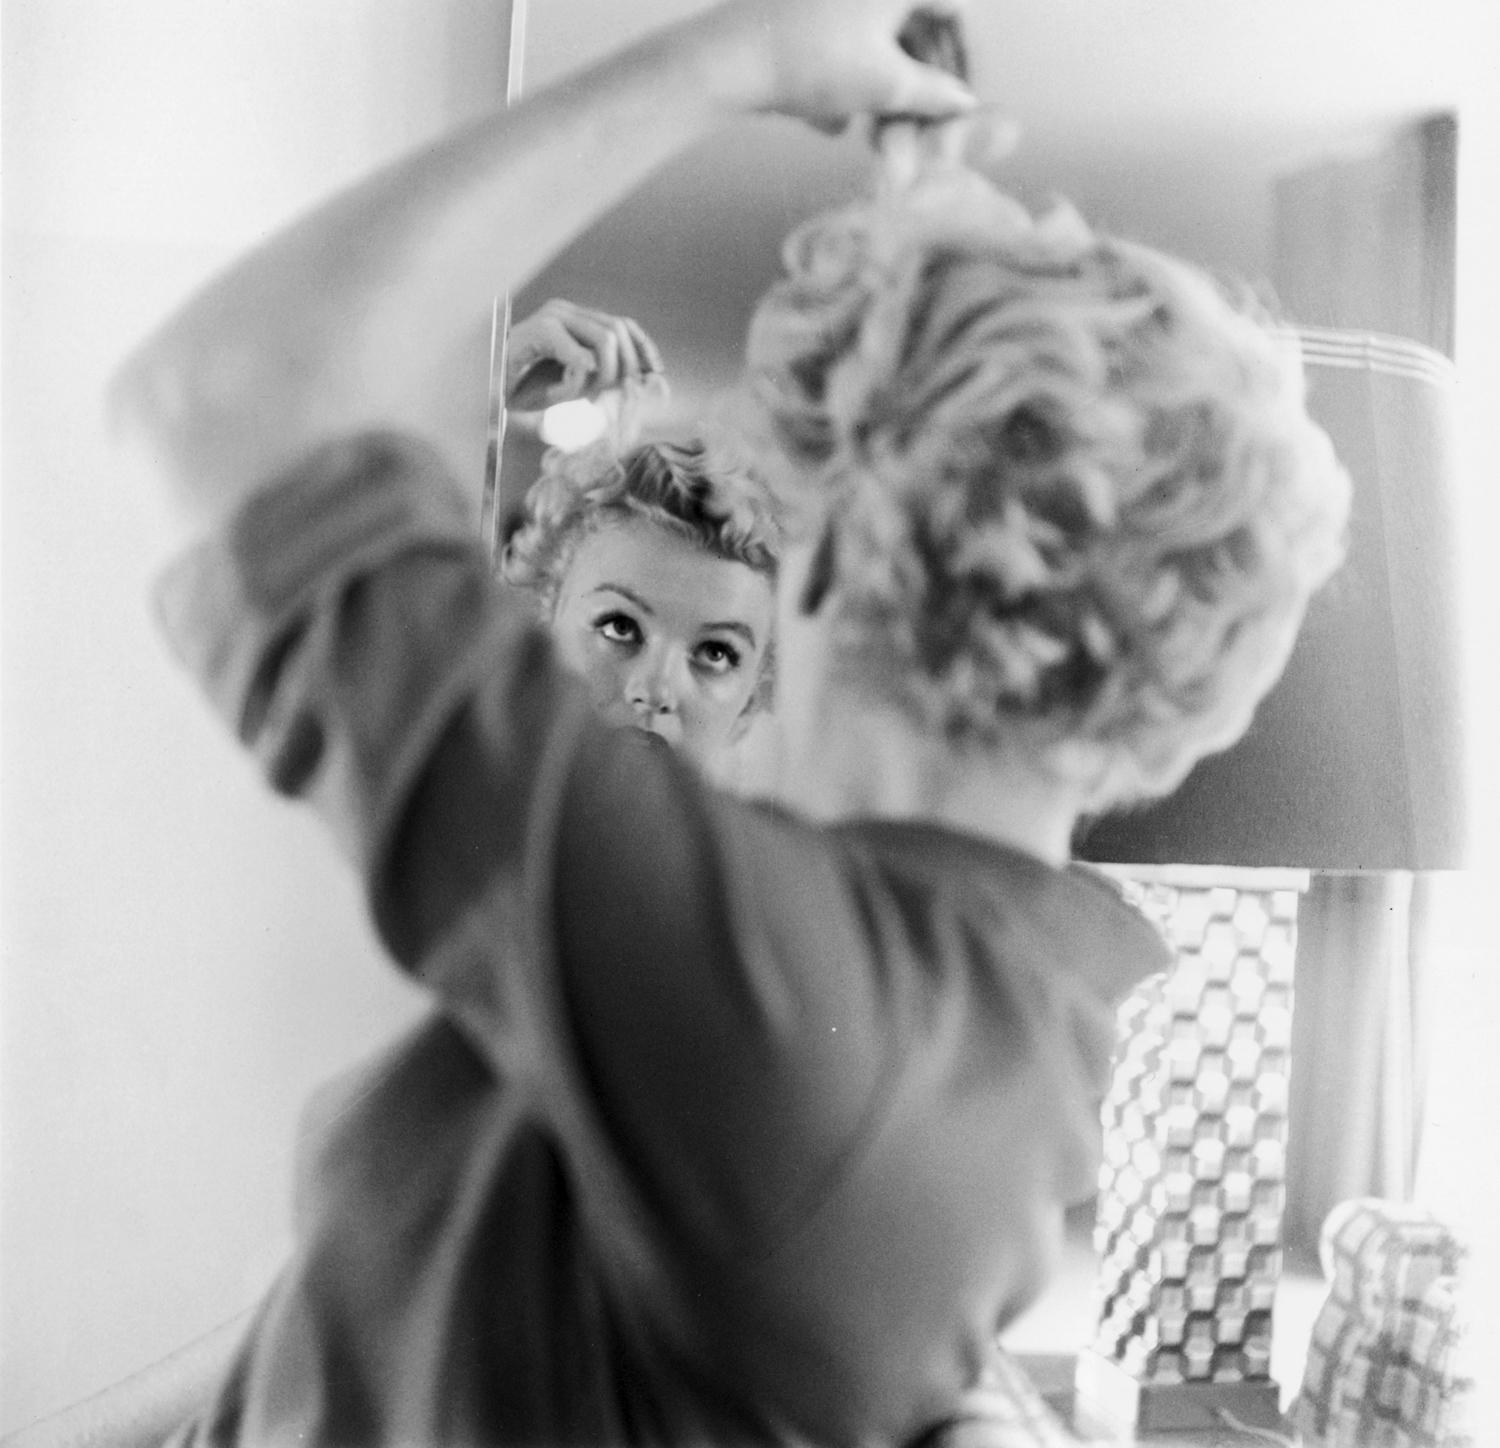 In this undated photo, Monroe touches up her 'do in front of a mirror.